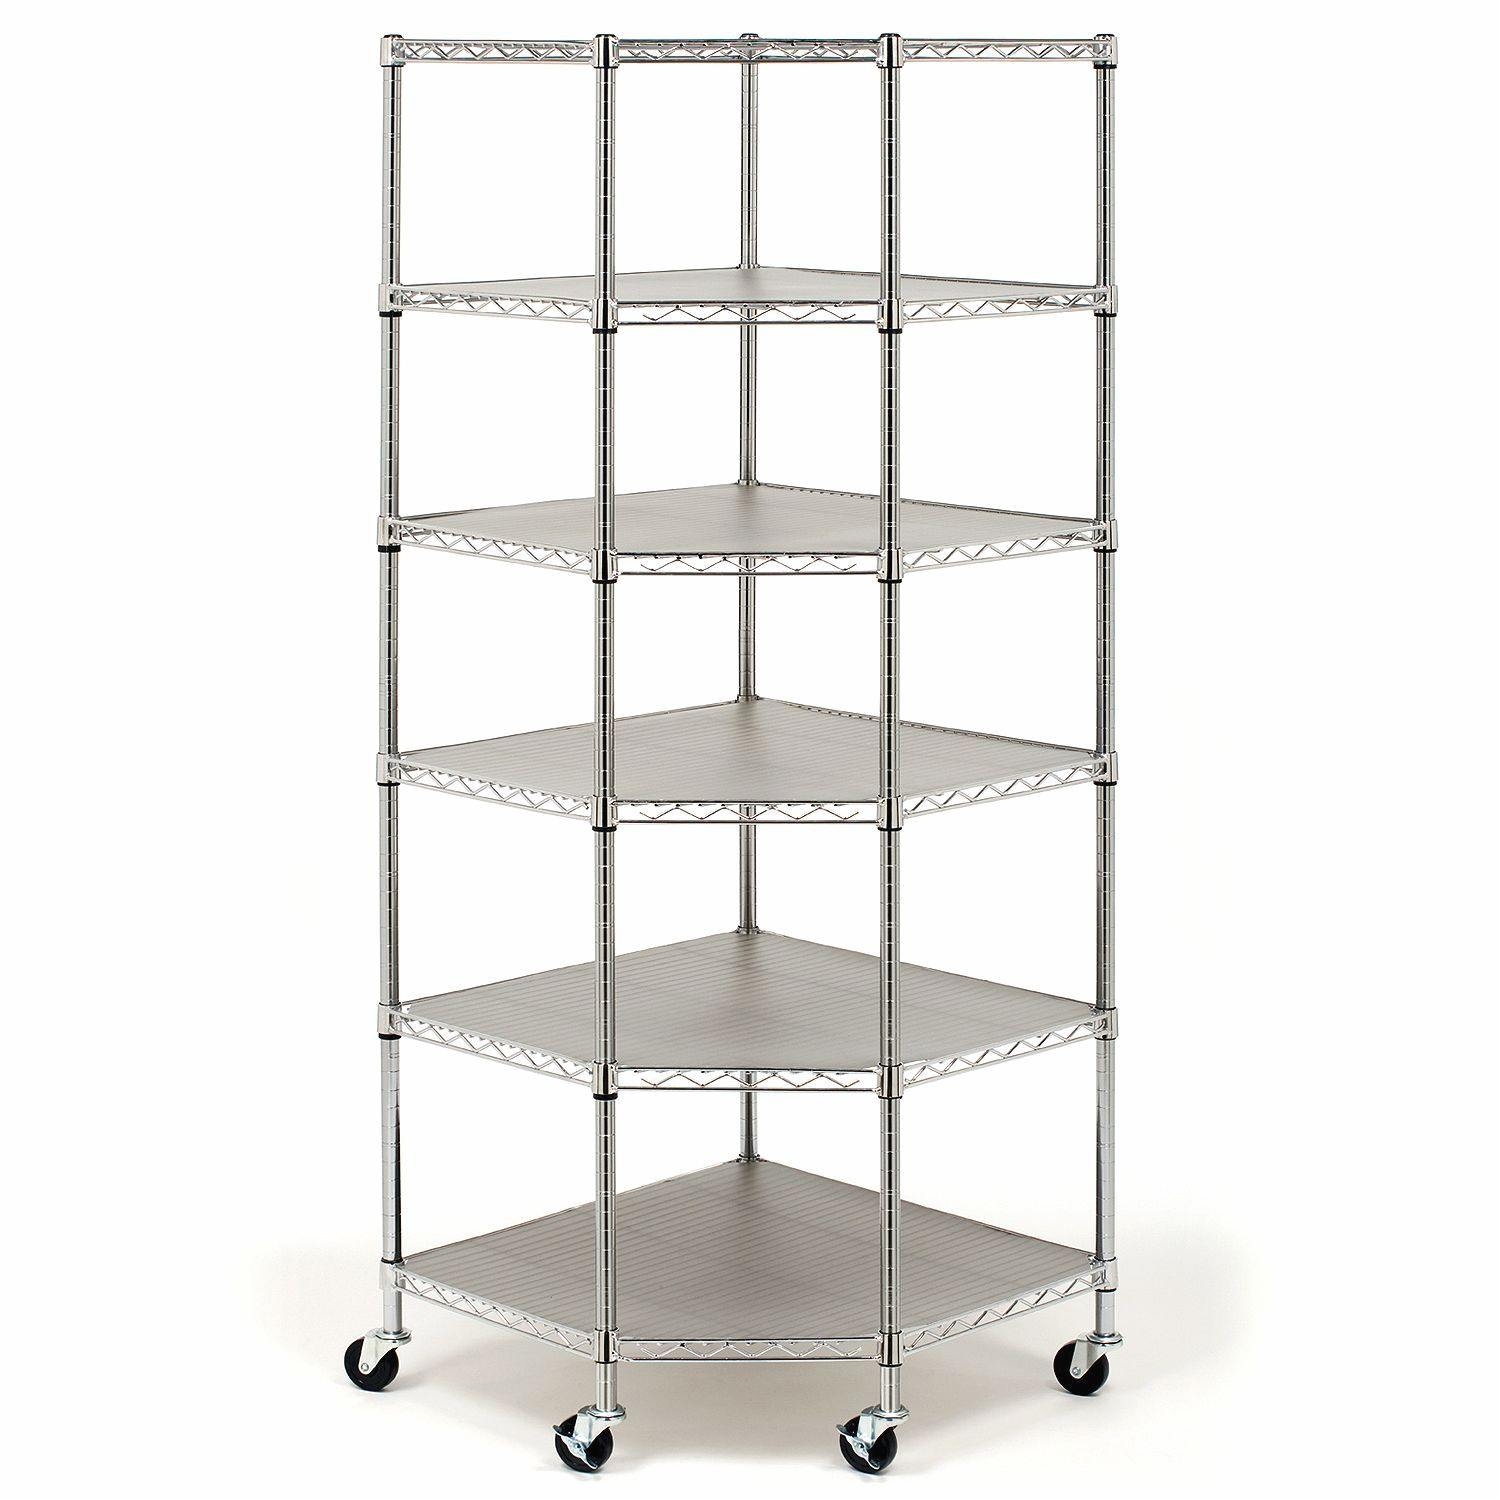 26 costco wire rack cheerful old fashioned mercial wire shelving systems simple